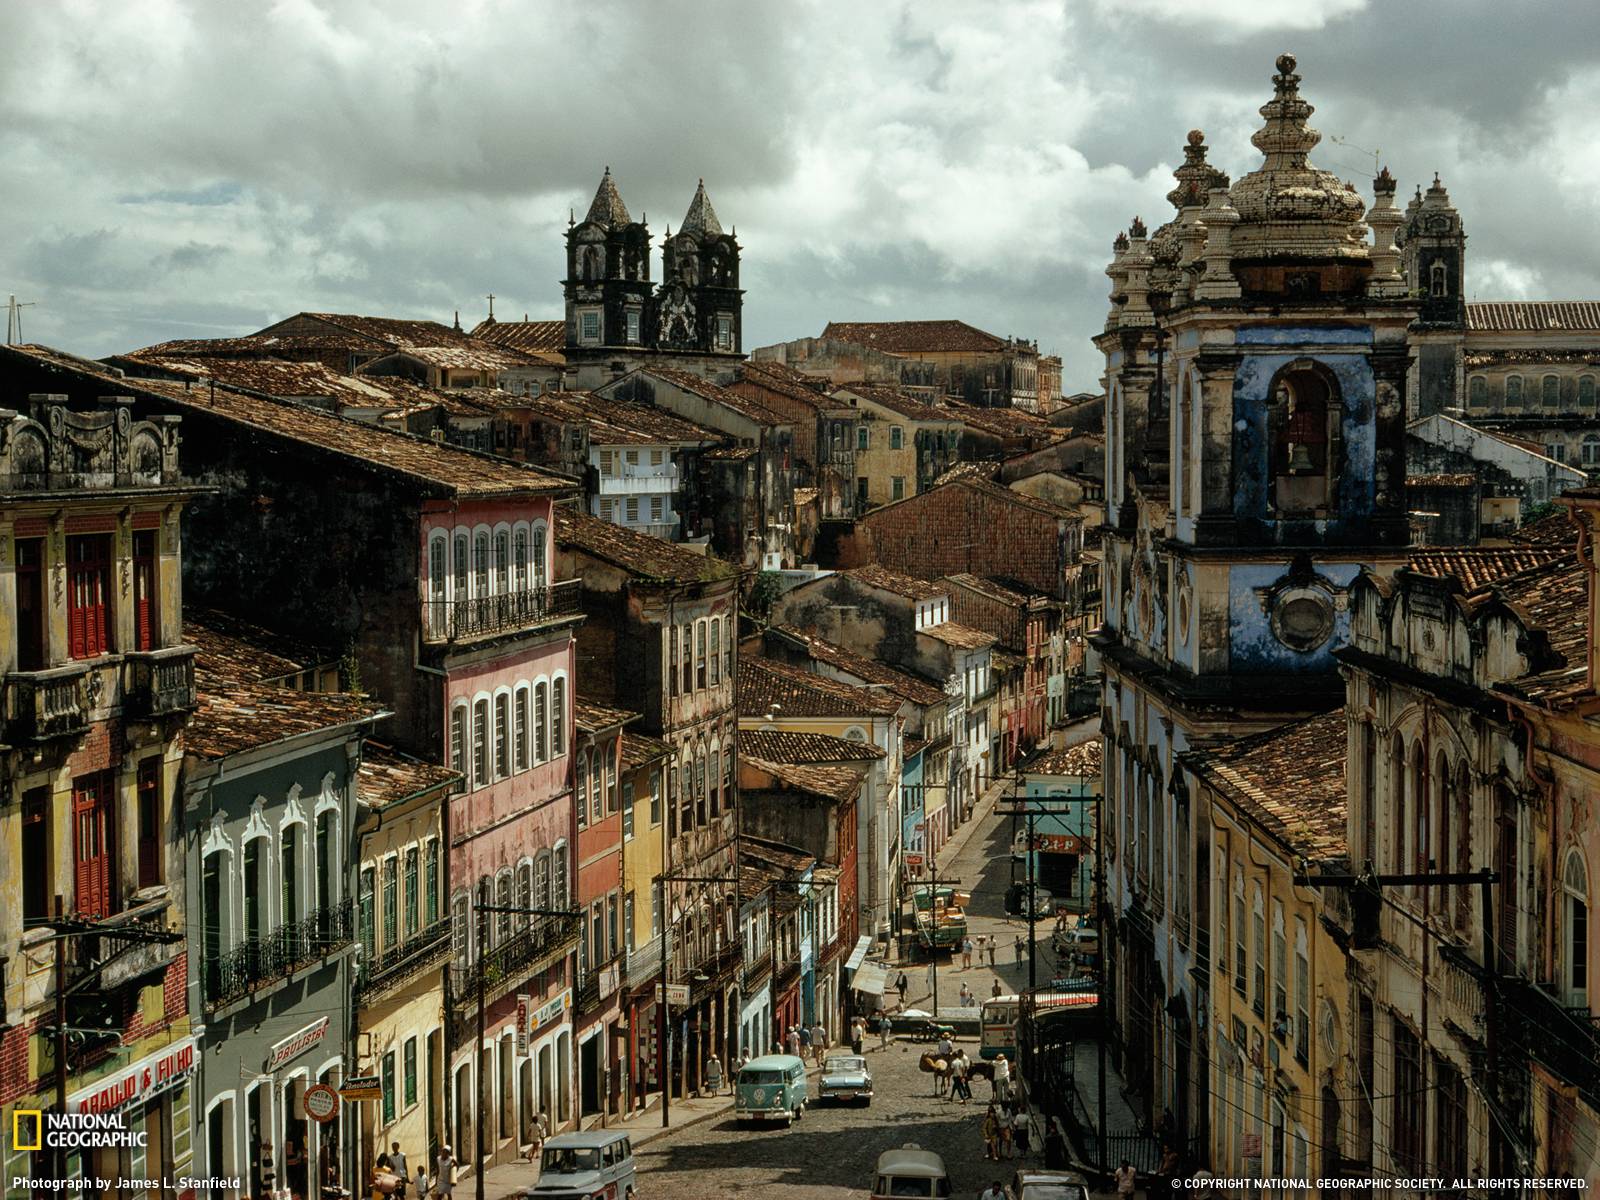 Salvador Picture - Brazil Wallpaper - National Geographic Photo